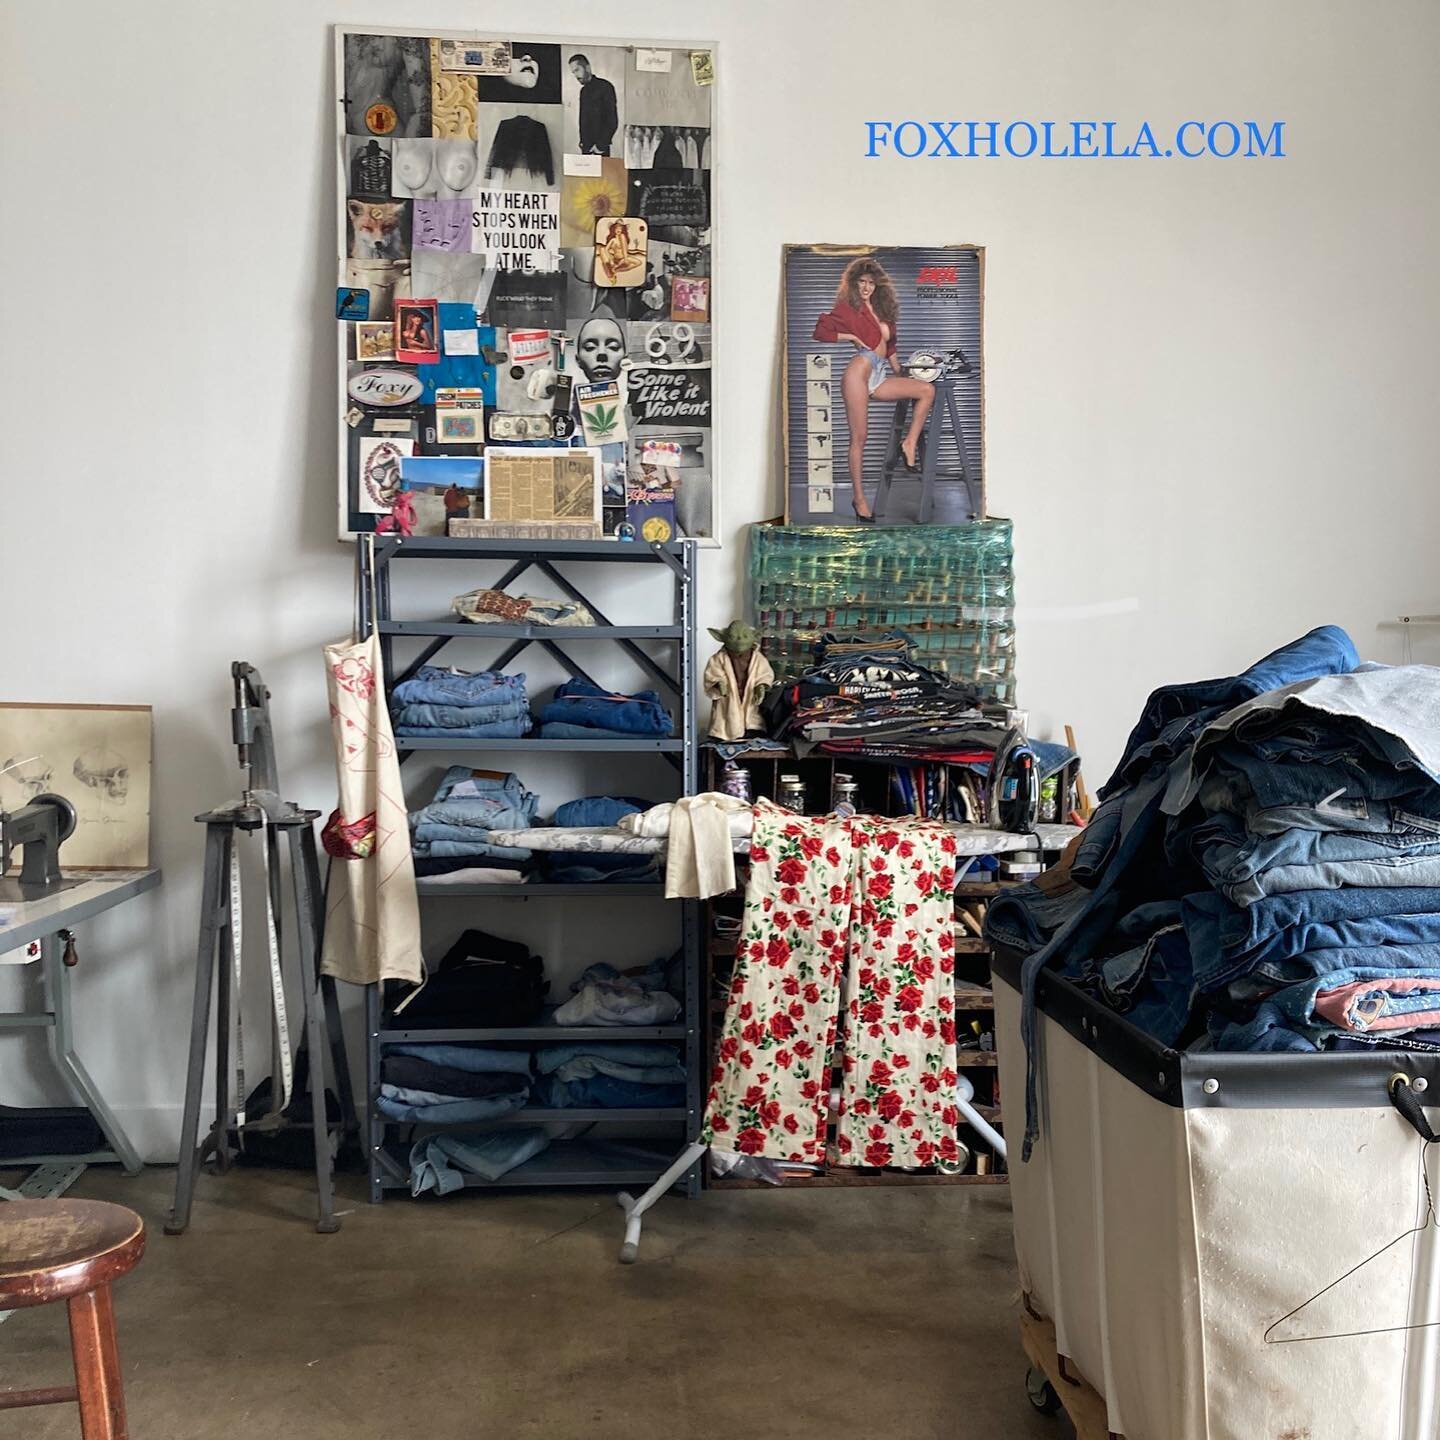 We love making custom denim pieces, one of a kind every time !! 👖✨ Book your free consultation appointment at FoxholeLA.com!